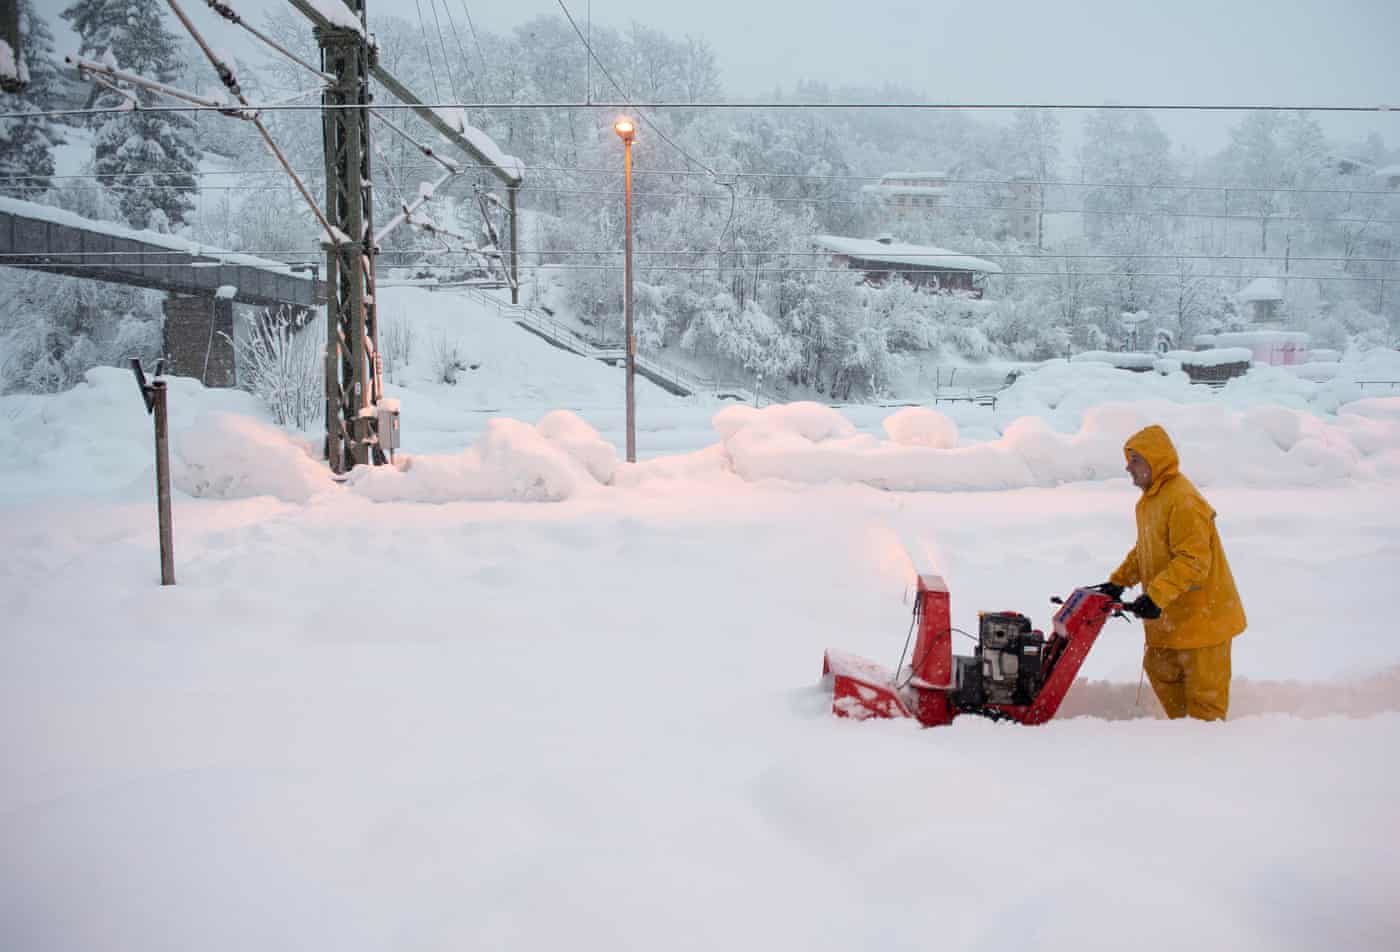 A man uses a snow blower to free a platform at the station in Berchtesgaden, Bavaria, Germany. Austria